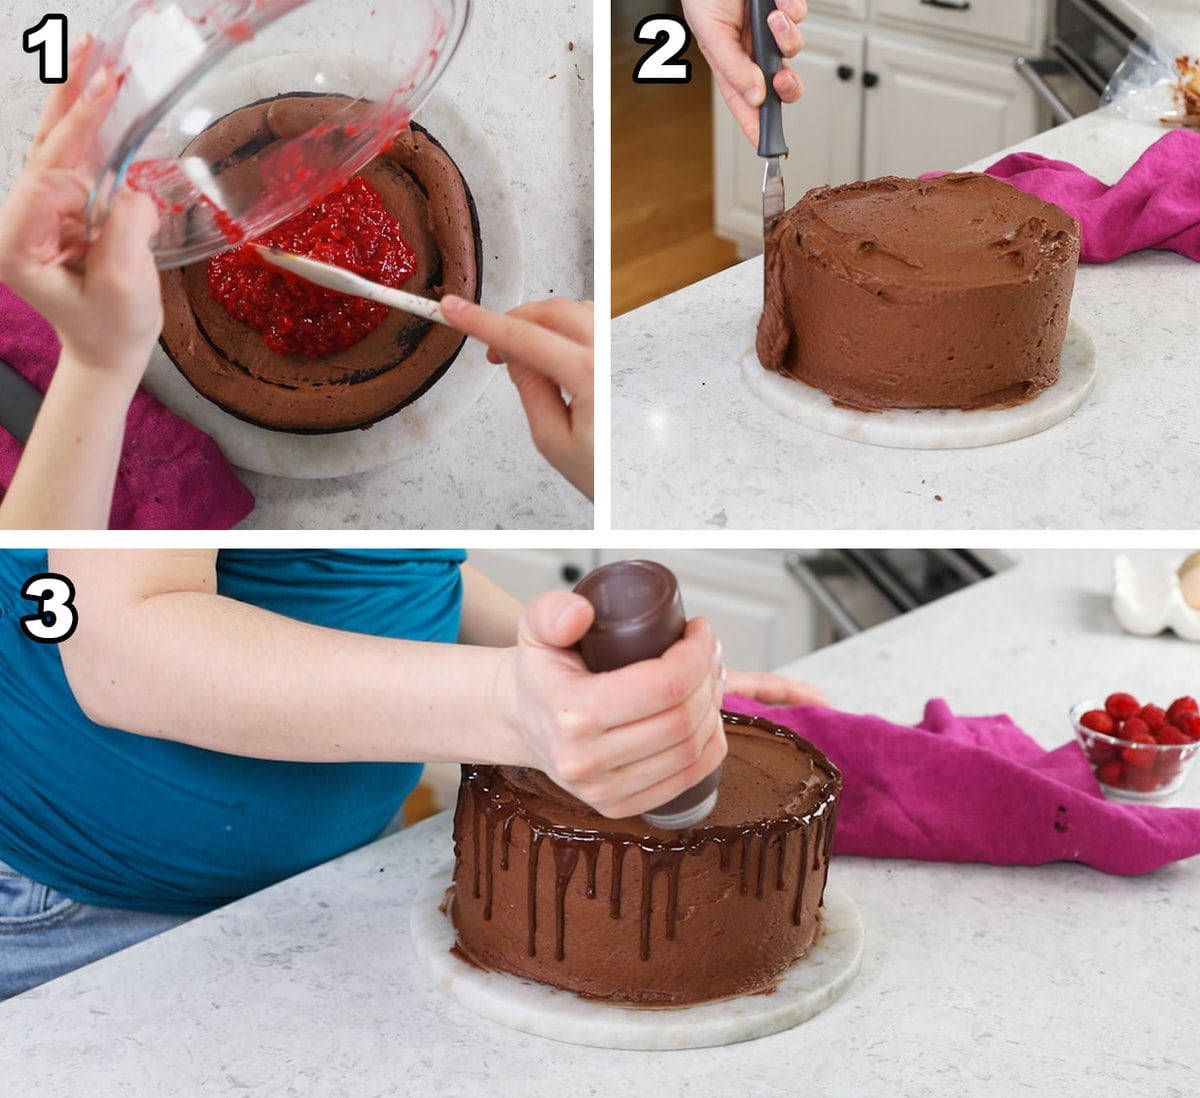 Three photos showing a chocolate cake being filled with raspberry cake filling, frosted with chocolate frosting, and decorated with a ganache drip.